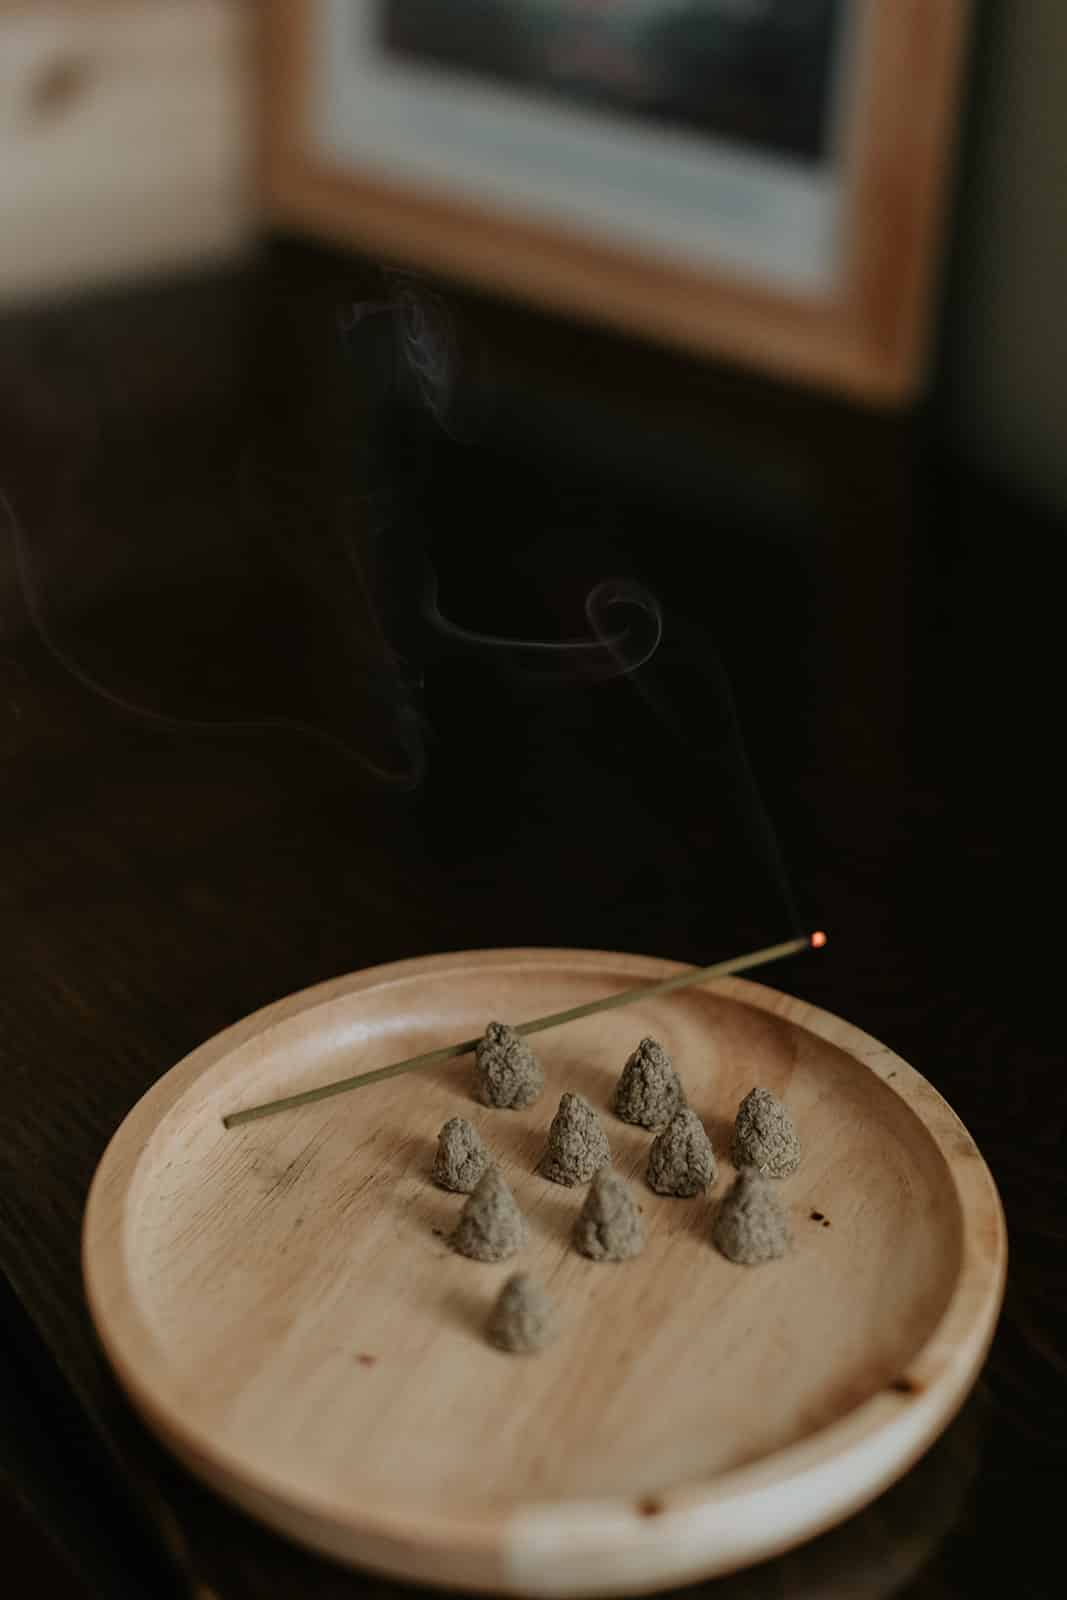 Moxibustion supplies and incense sticks neatly arranged on a wooden table, ready for a traditional therapy session.